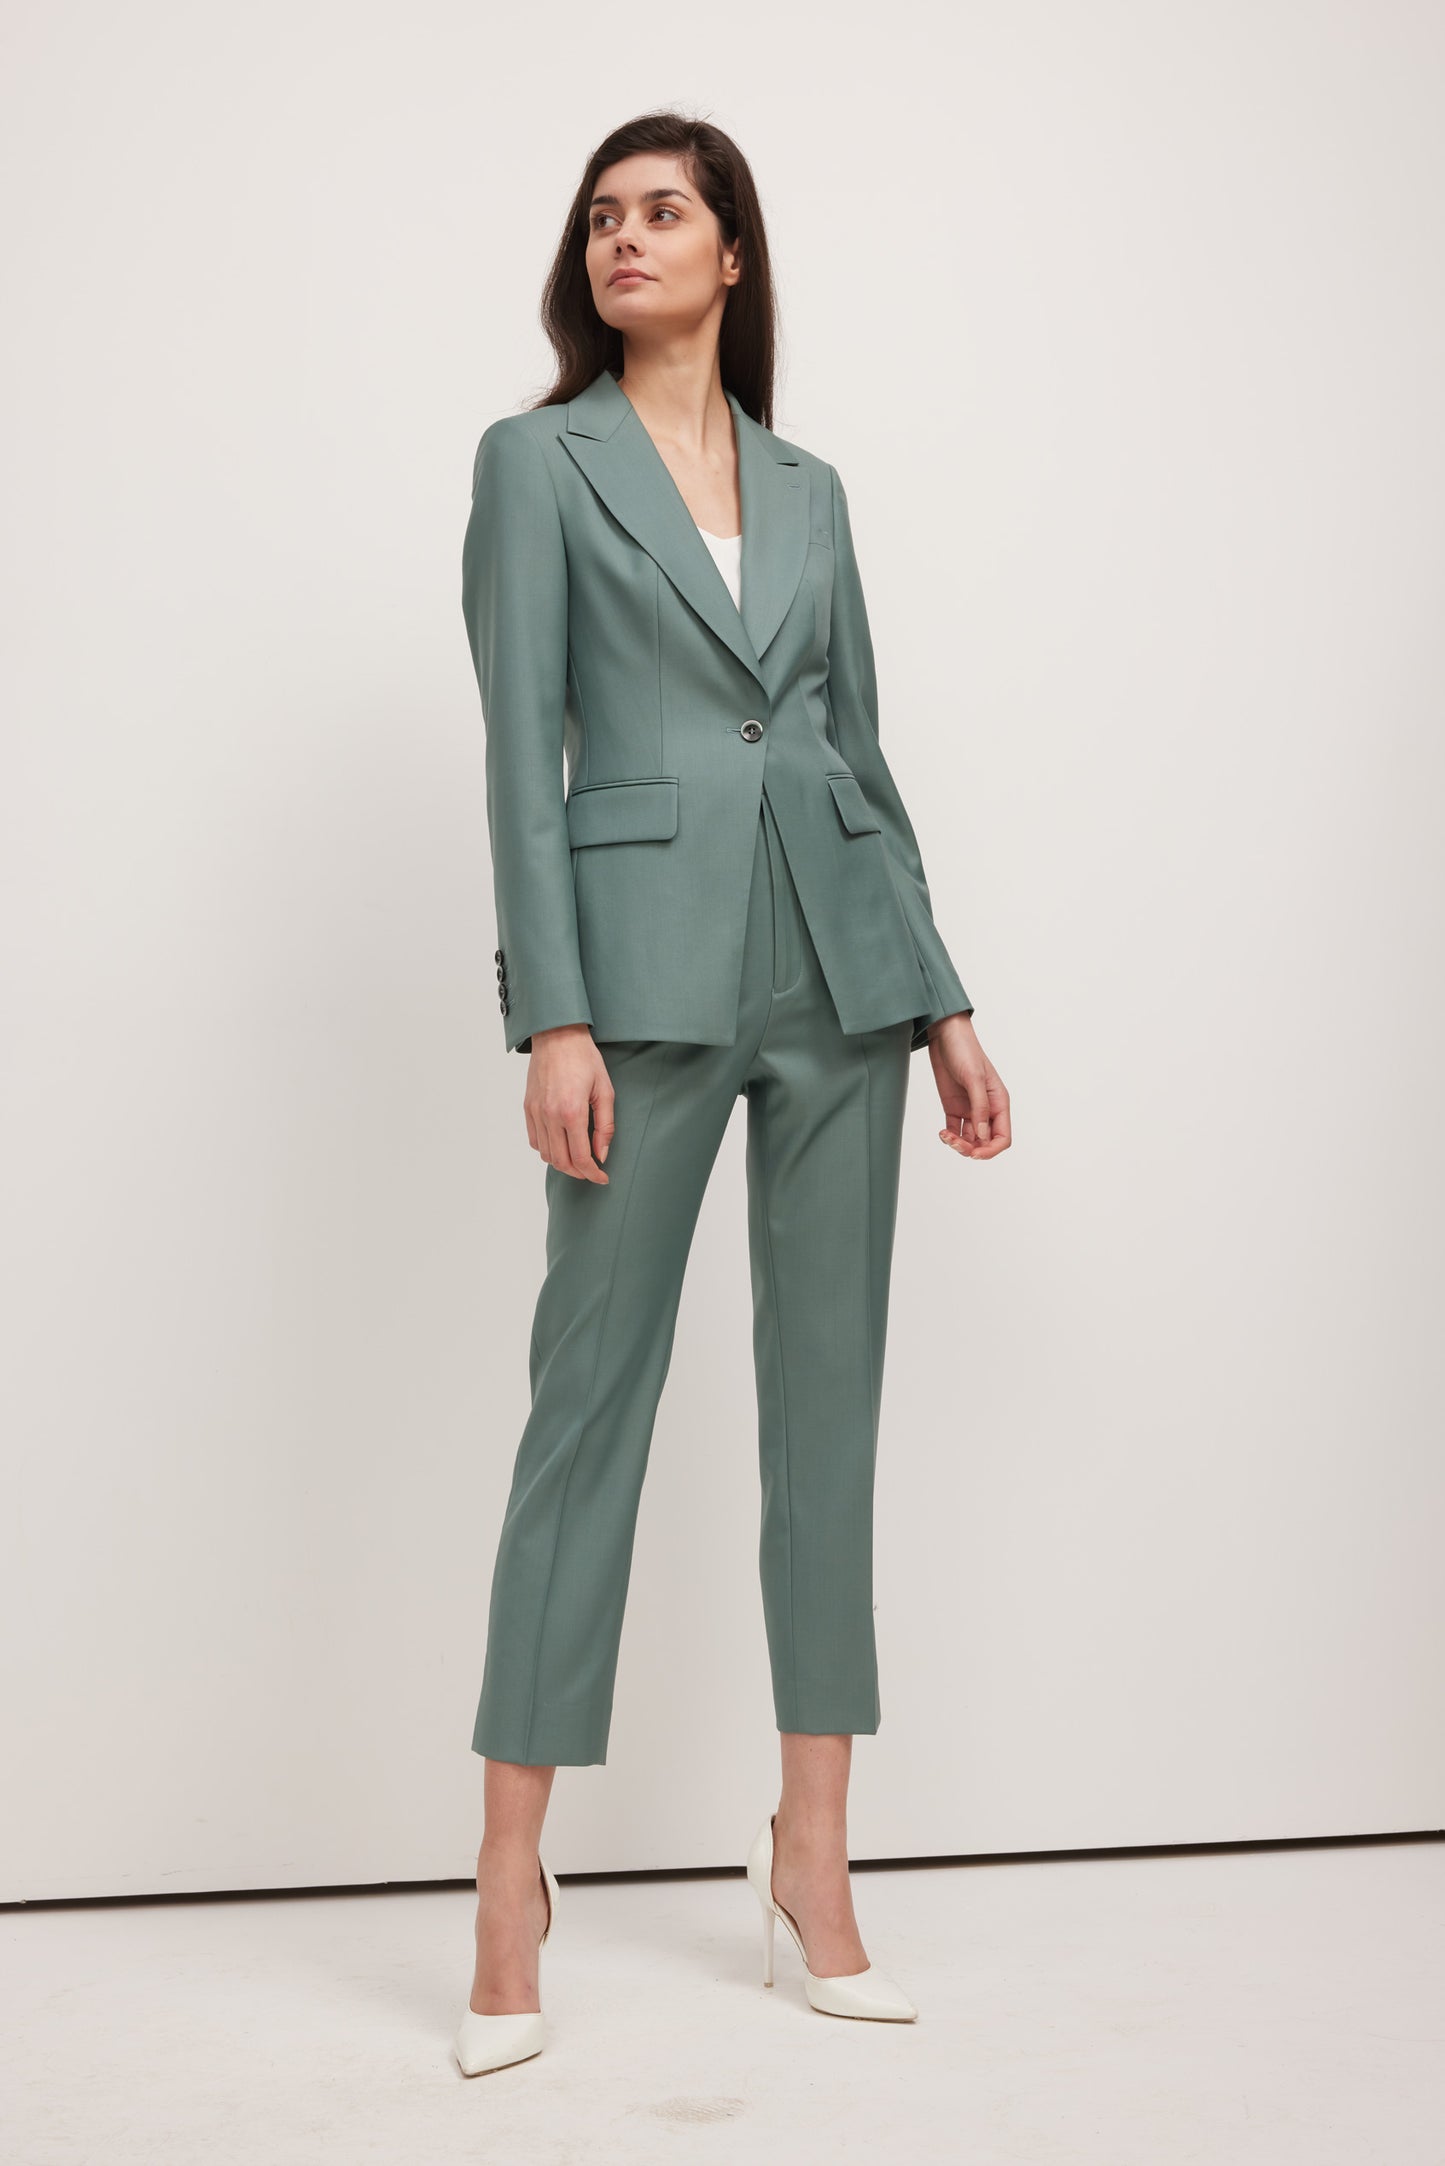 Easy to Wear - Jade Green Suits